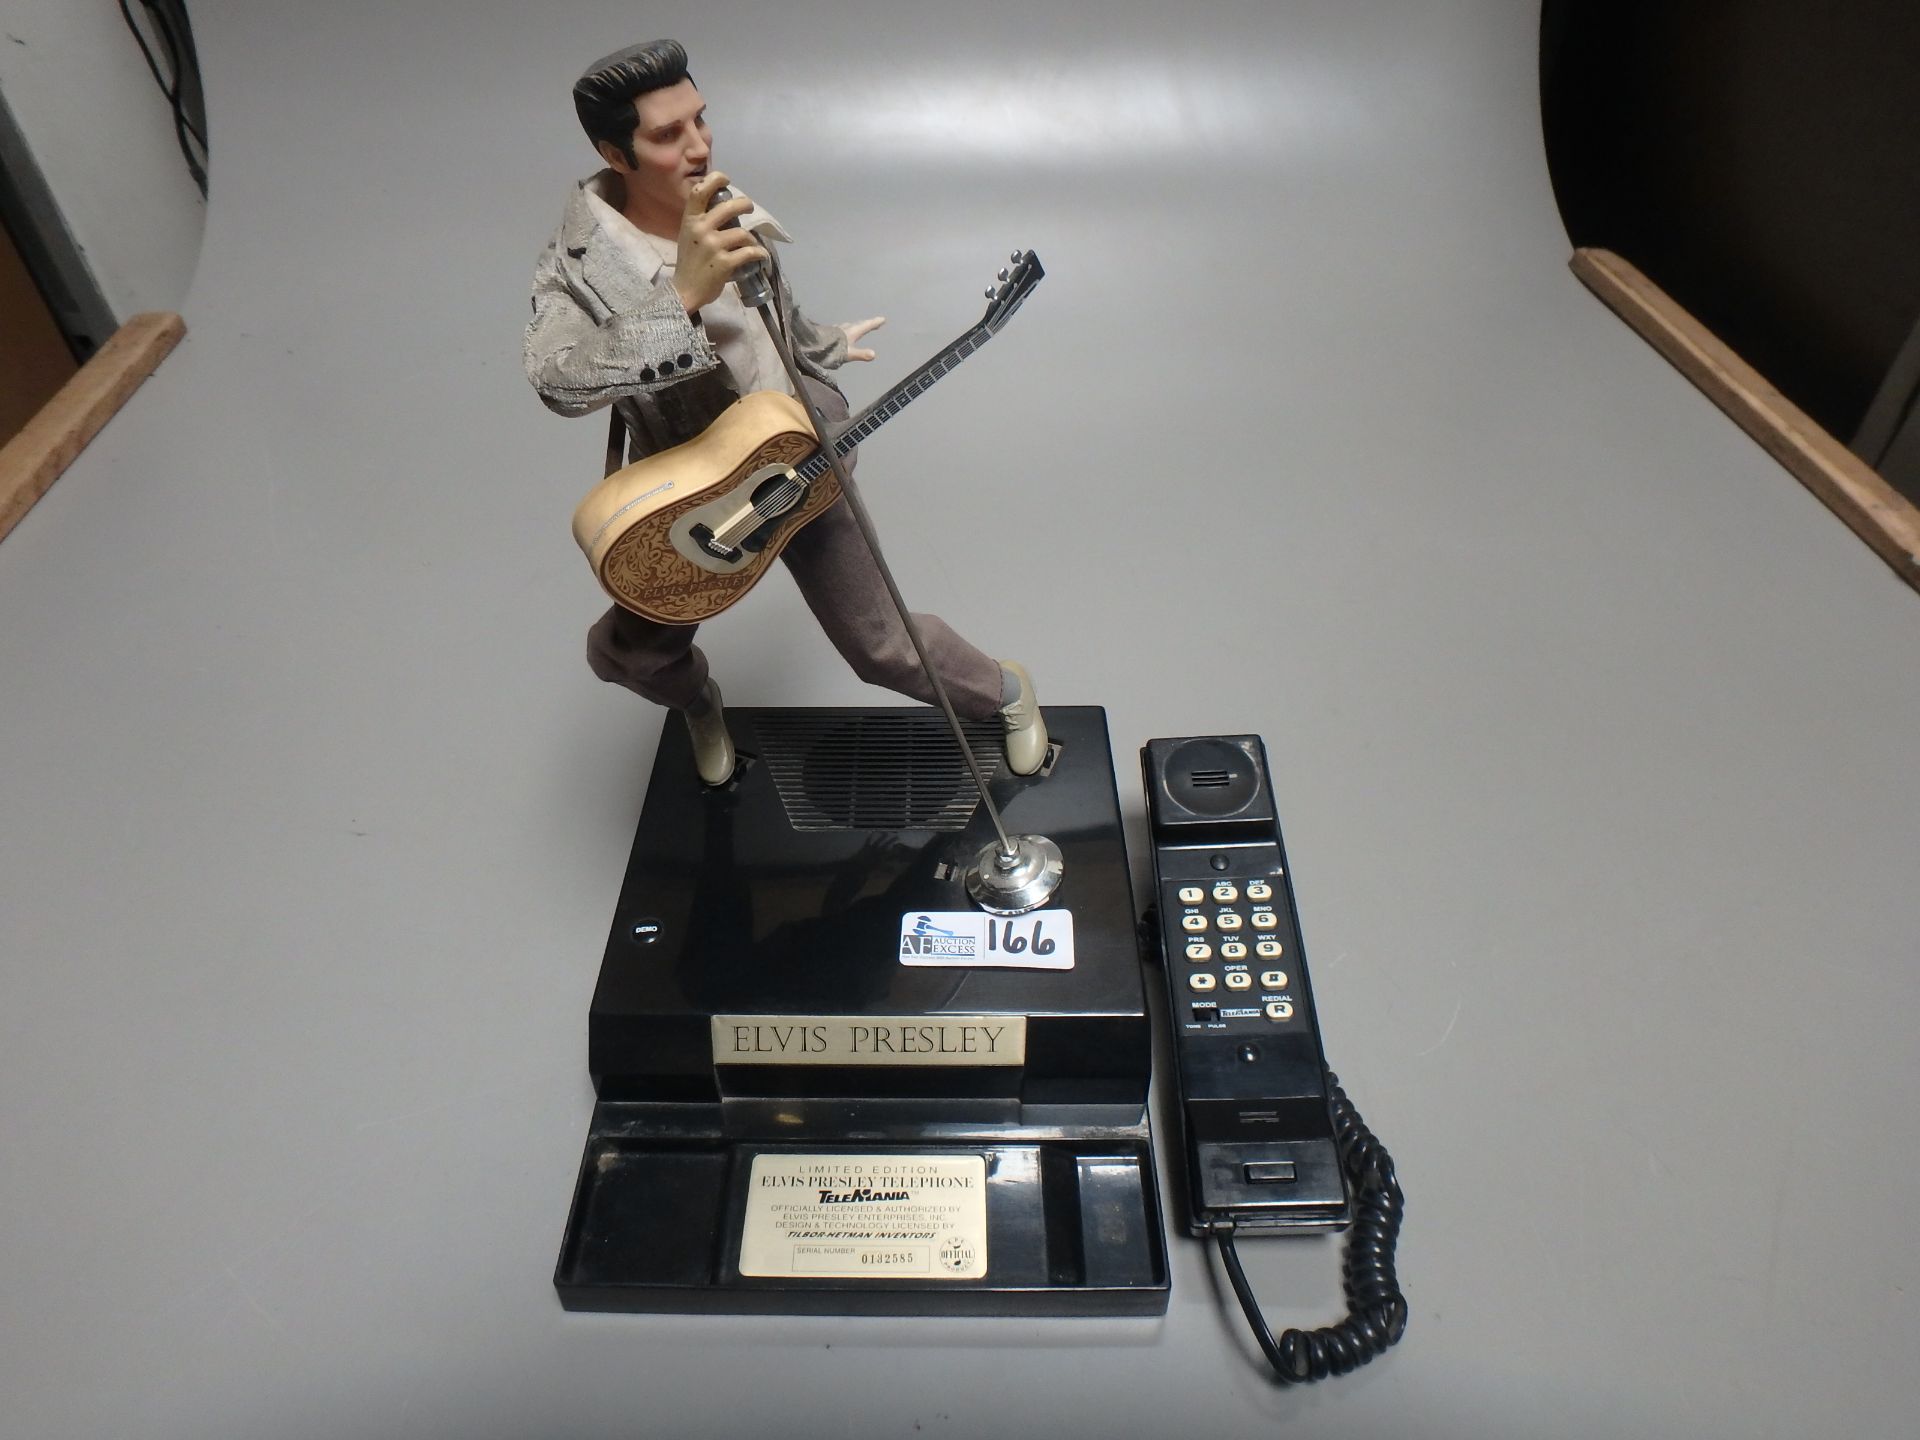 LIMITED EDITION ELVIS PRESLEY TELEPHONE - Image 2 of 2